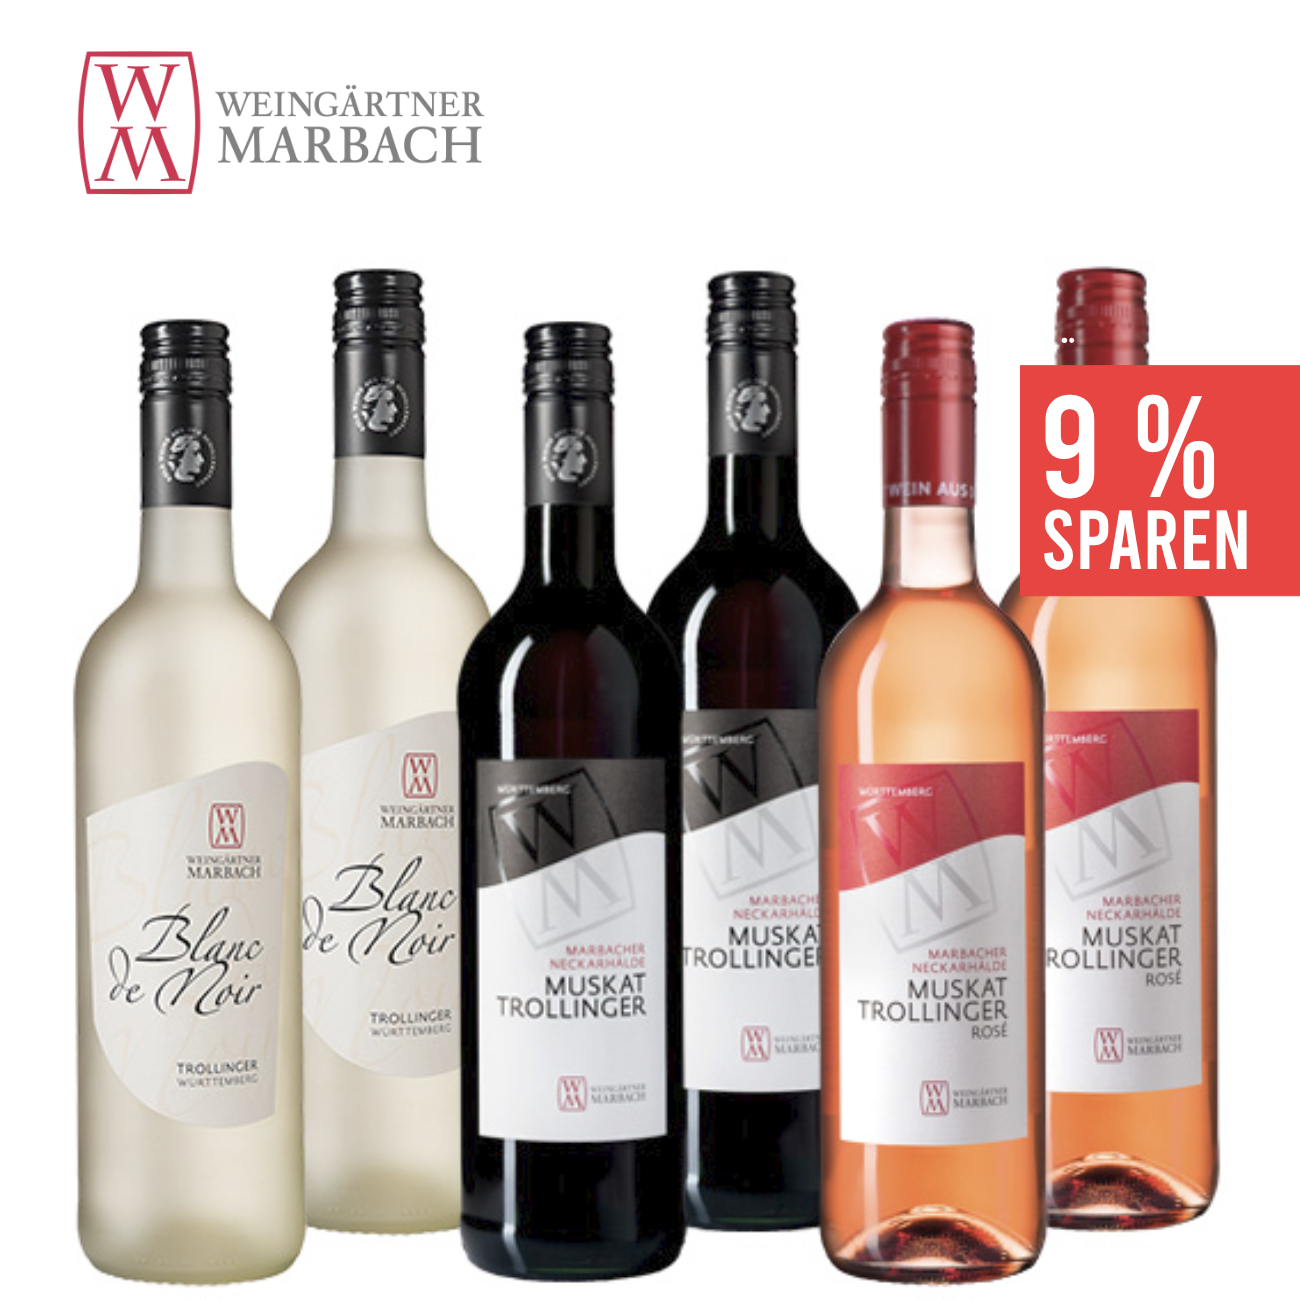 wein.plus Find+Buy of wines The members | Find+Buy: our wein.plus